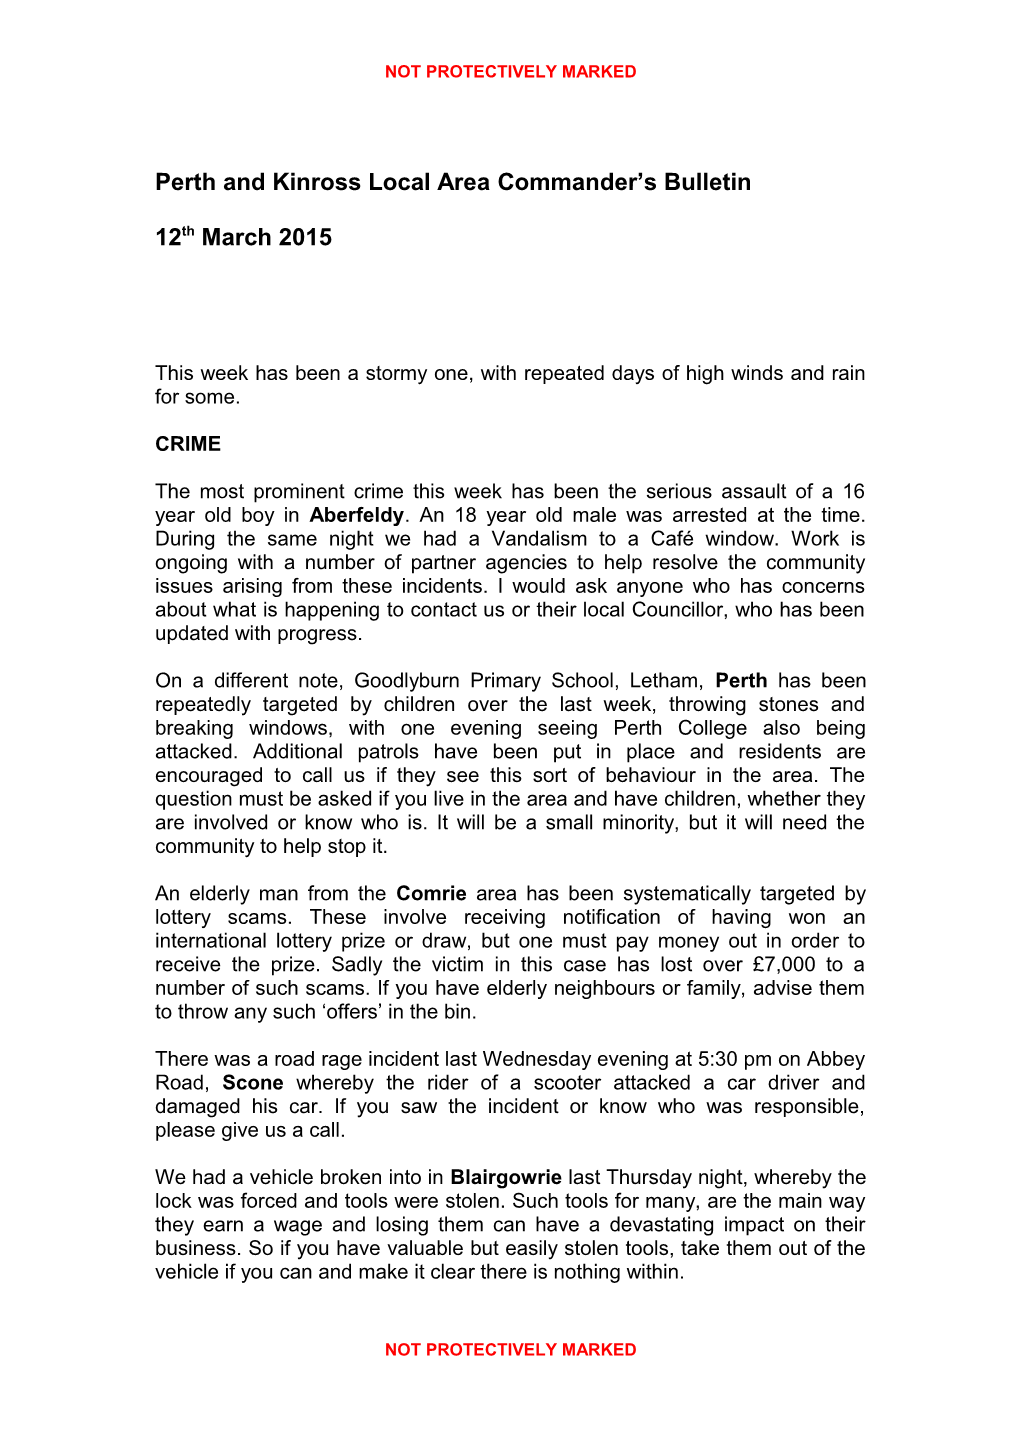 Perth and Kinross Local Area Commander S Bulletin s2